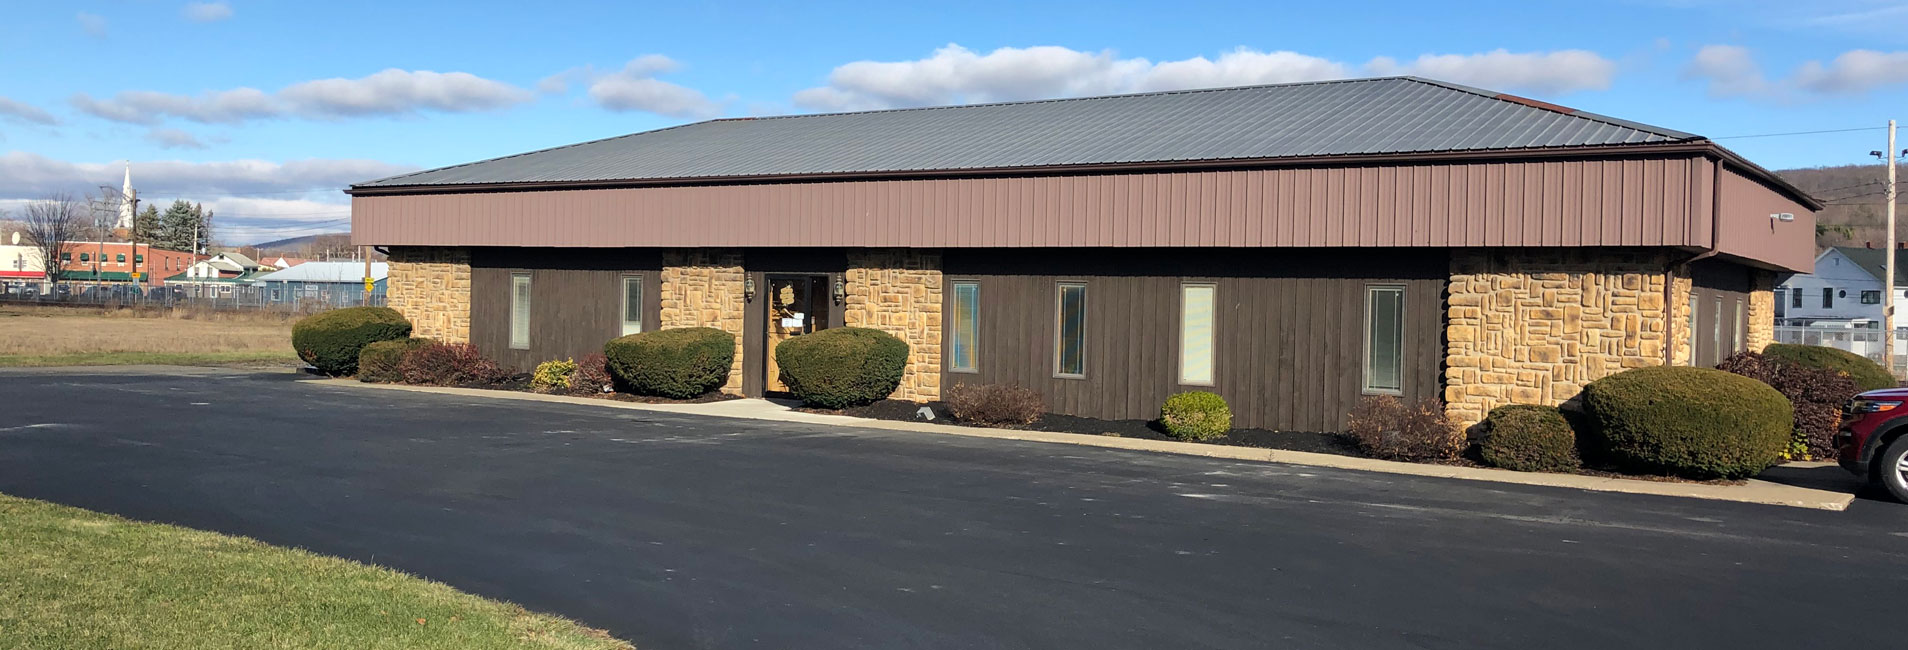 Weyand Chiropractic Associates | 20 Park Drive, Hornell, NY 14843